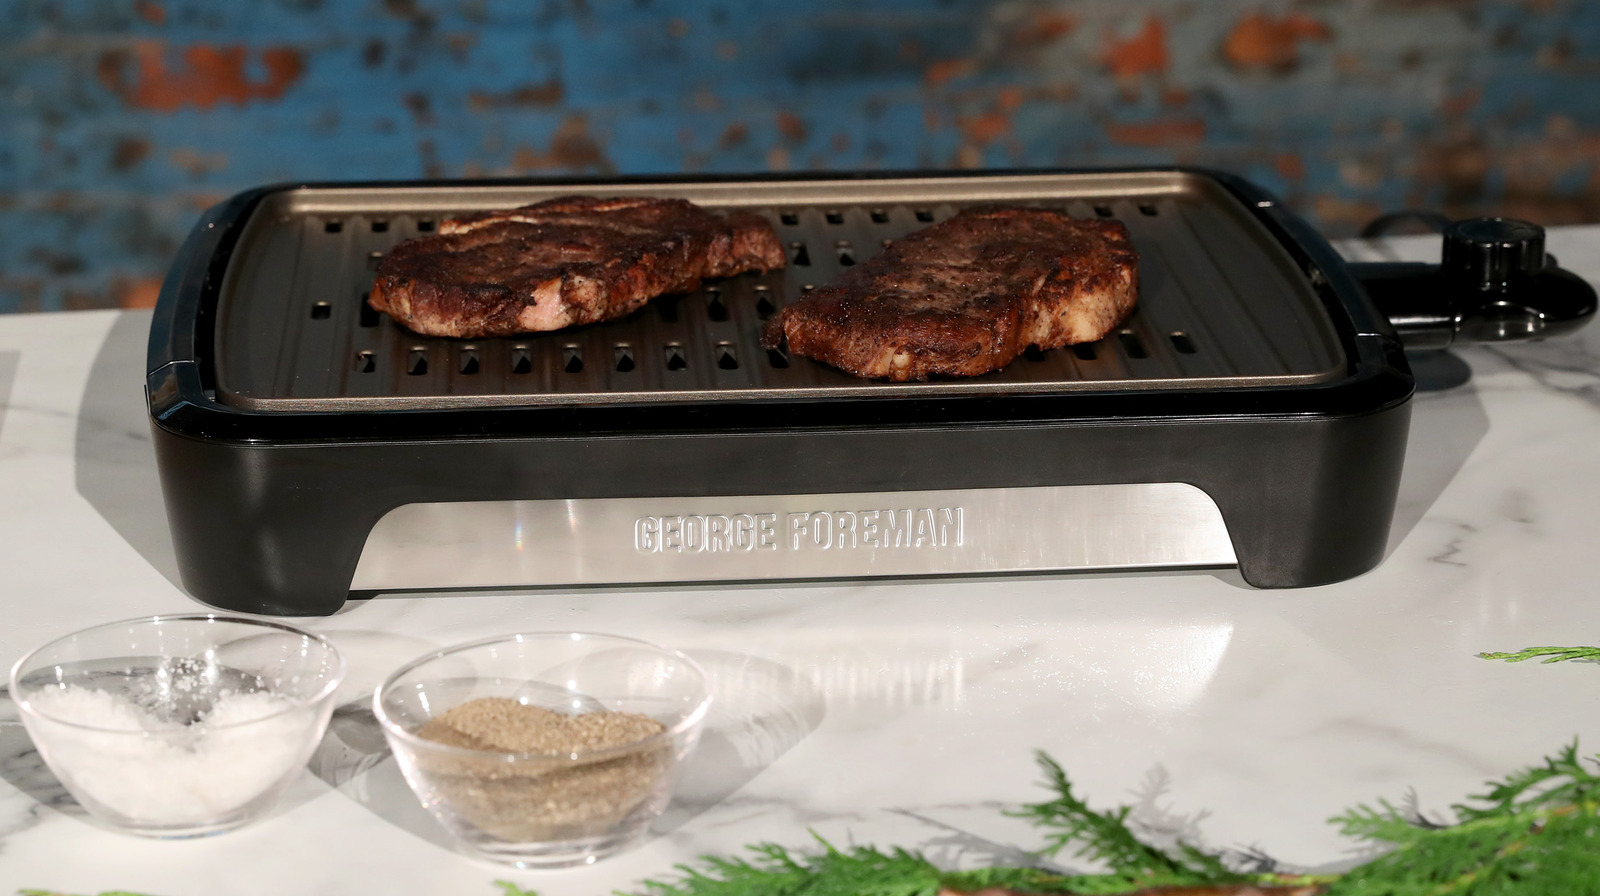 https://www.thedailymeal.com/img/gallery/how-to-properly-clean-your-george-foreman-grill/l-intro-1695835406.jpg